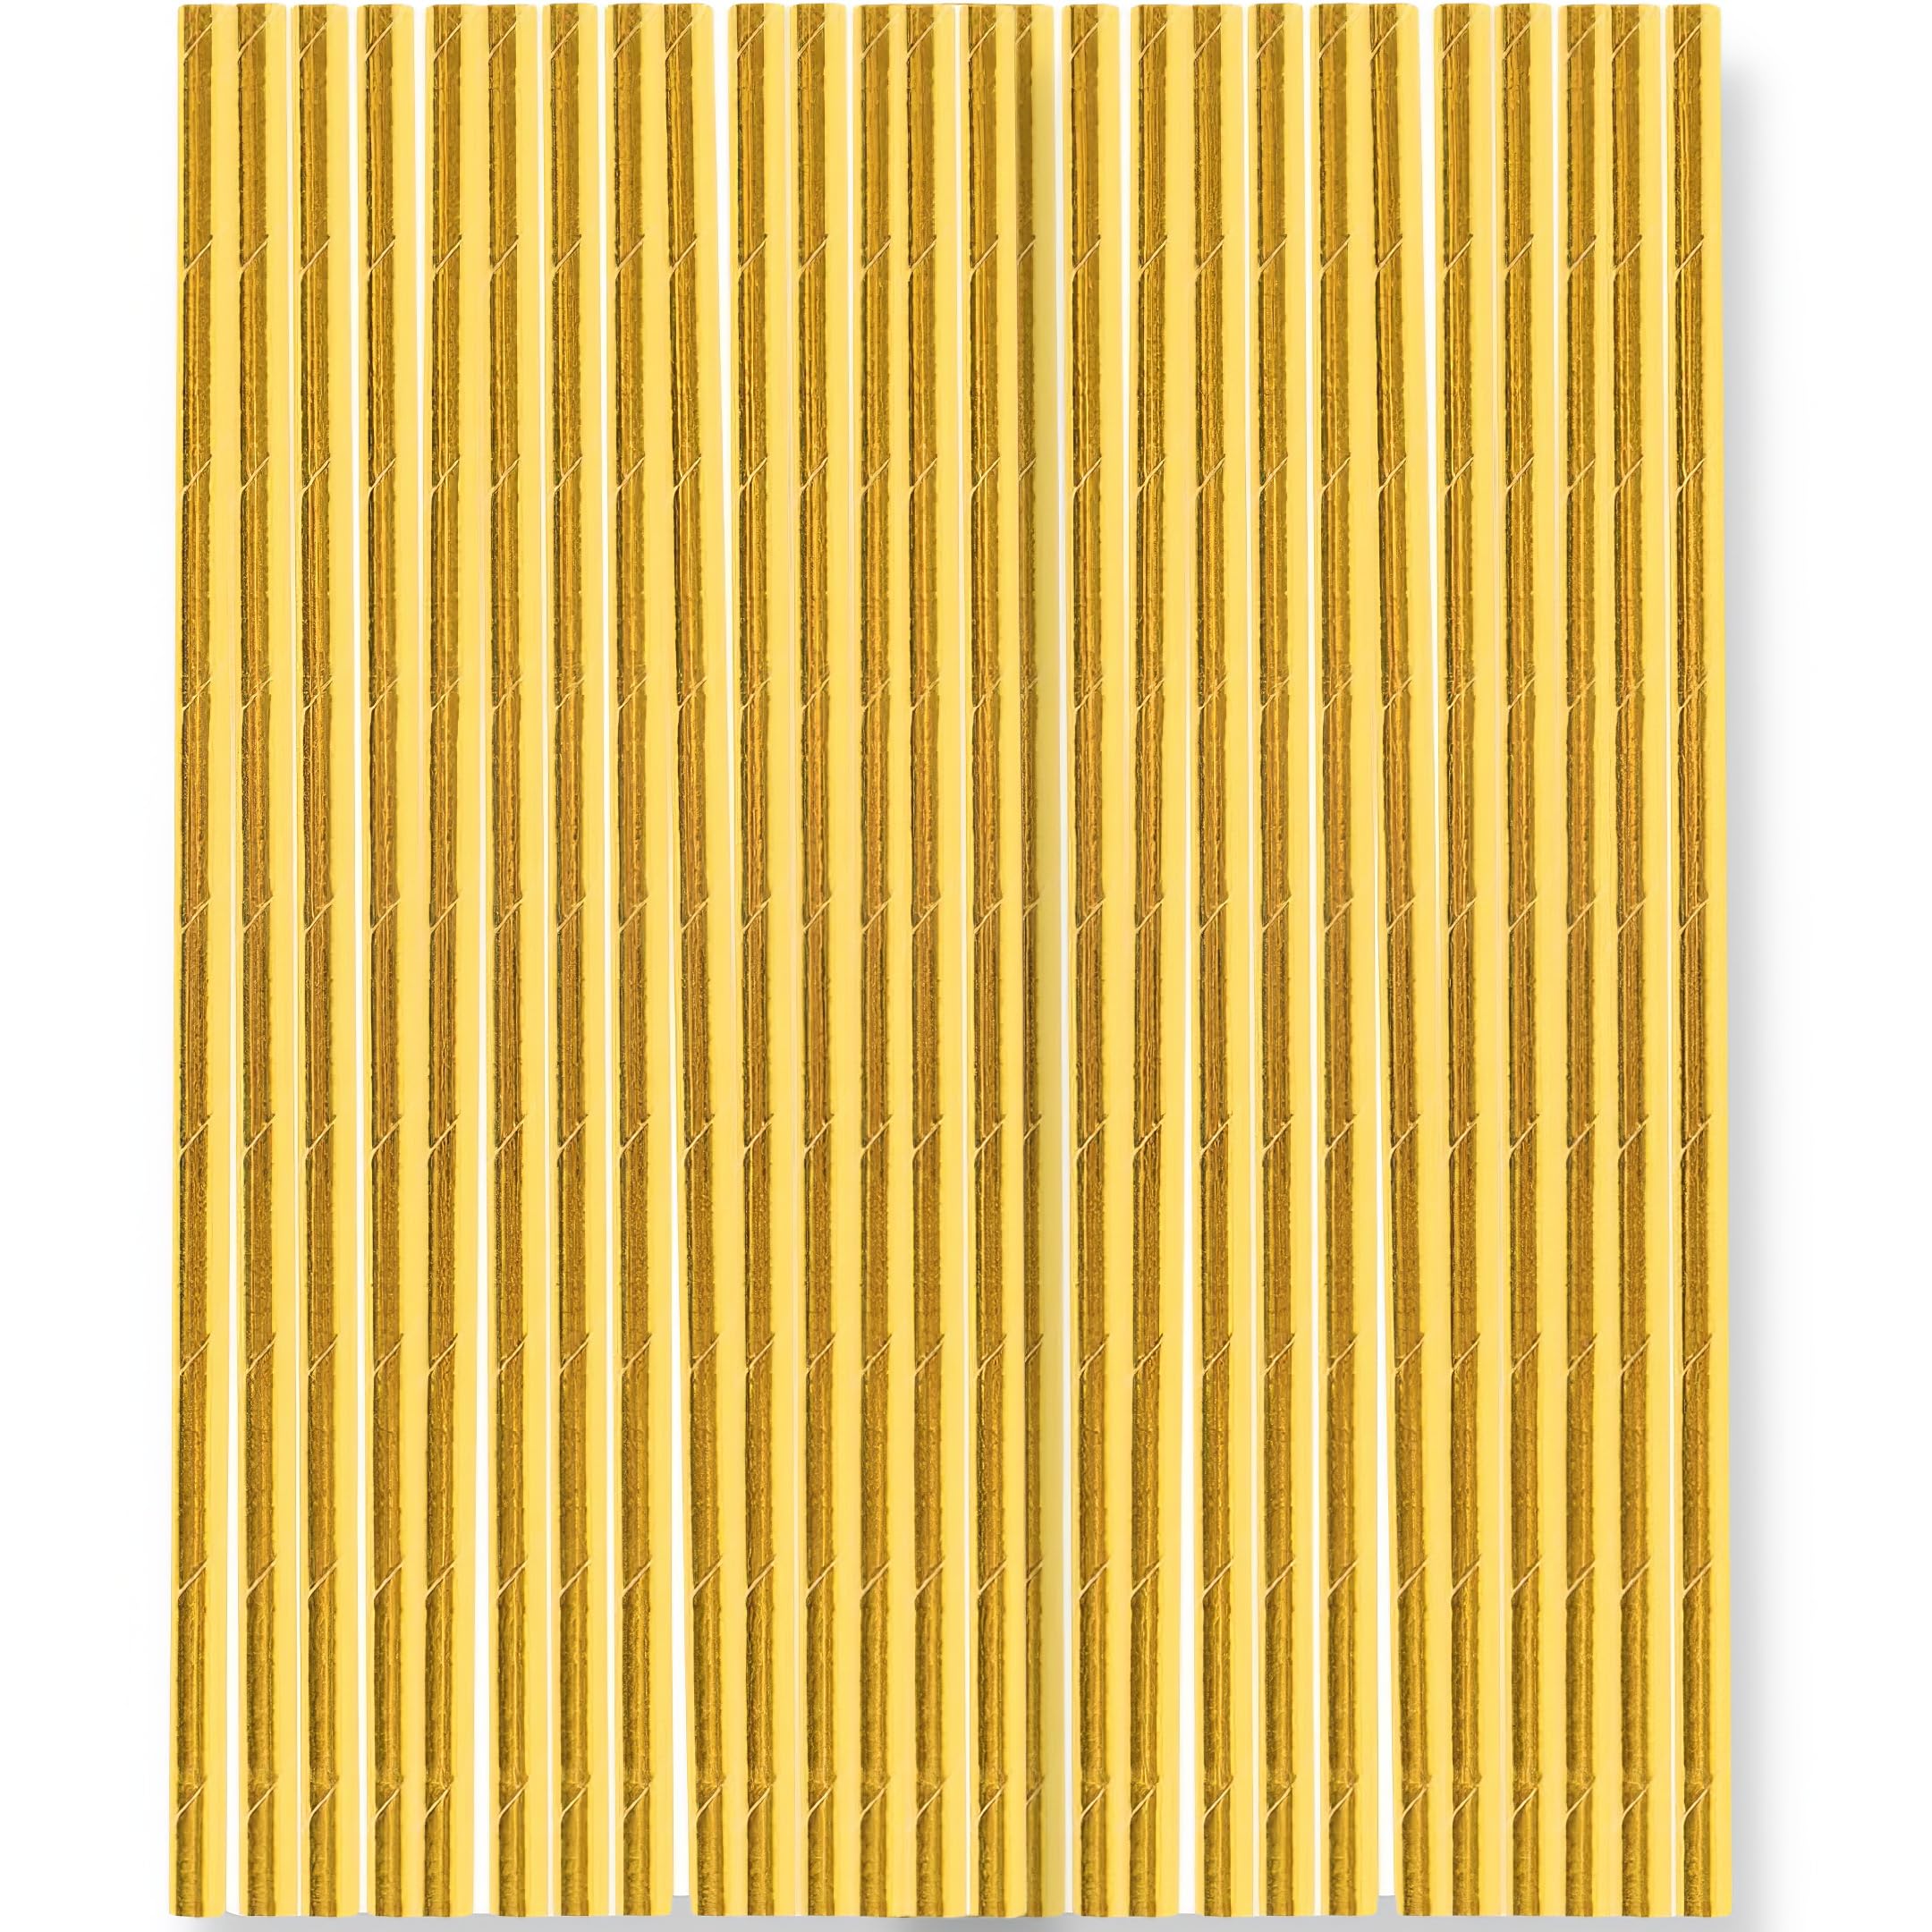 Gold Paper Straws - 24 Count | Eco-Friendly Disposable Drinking Straws for Parties & Events